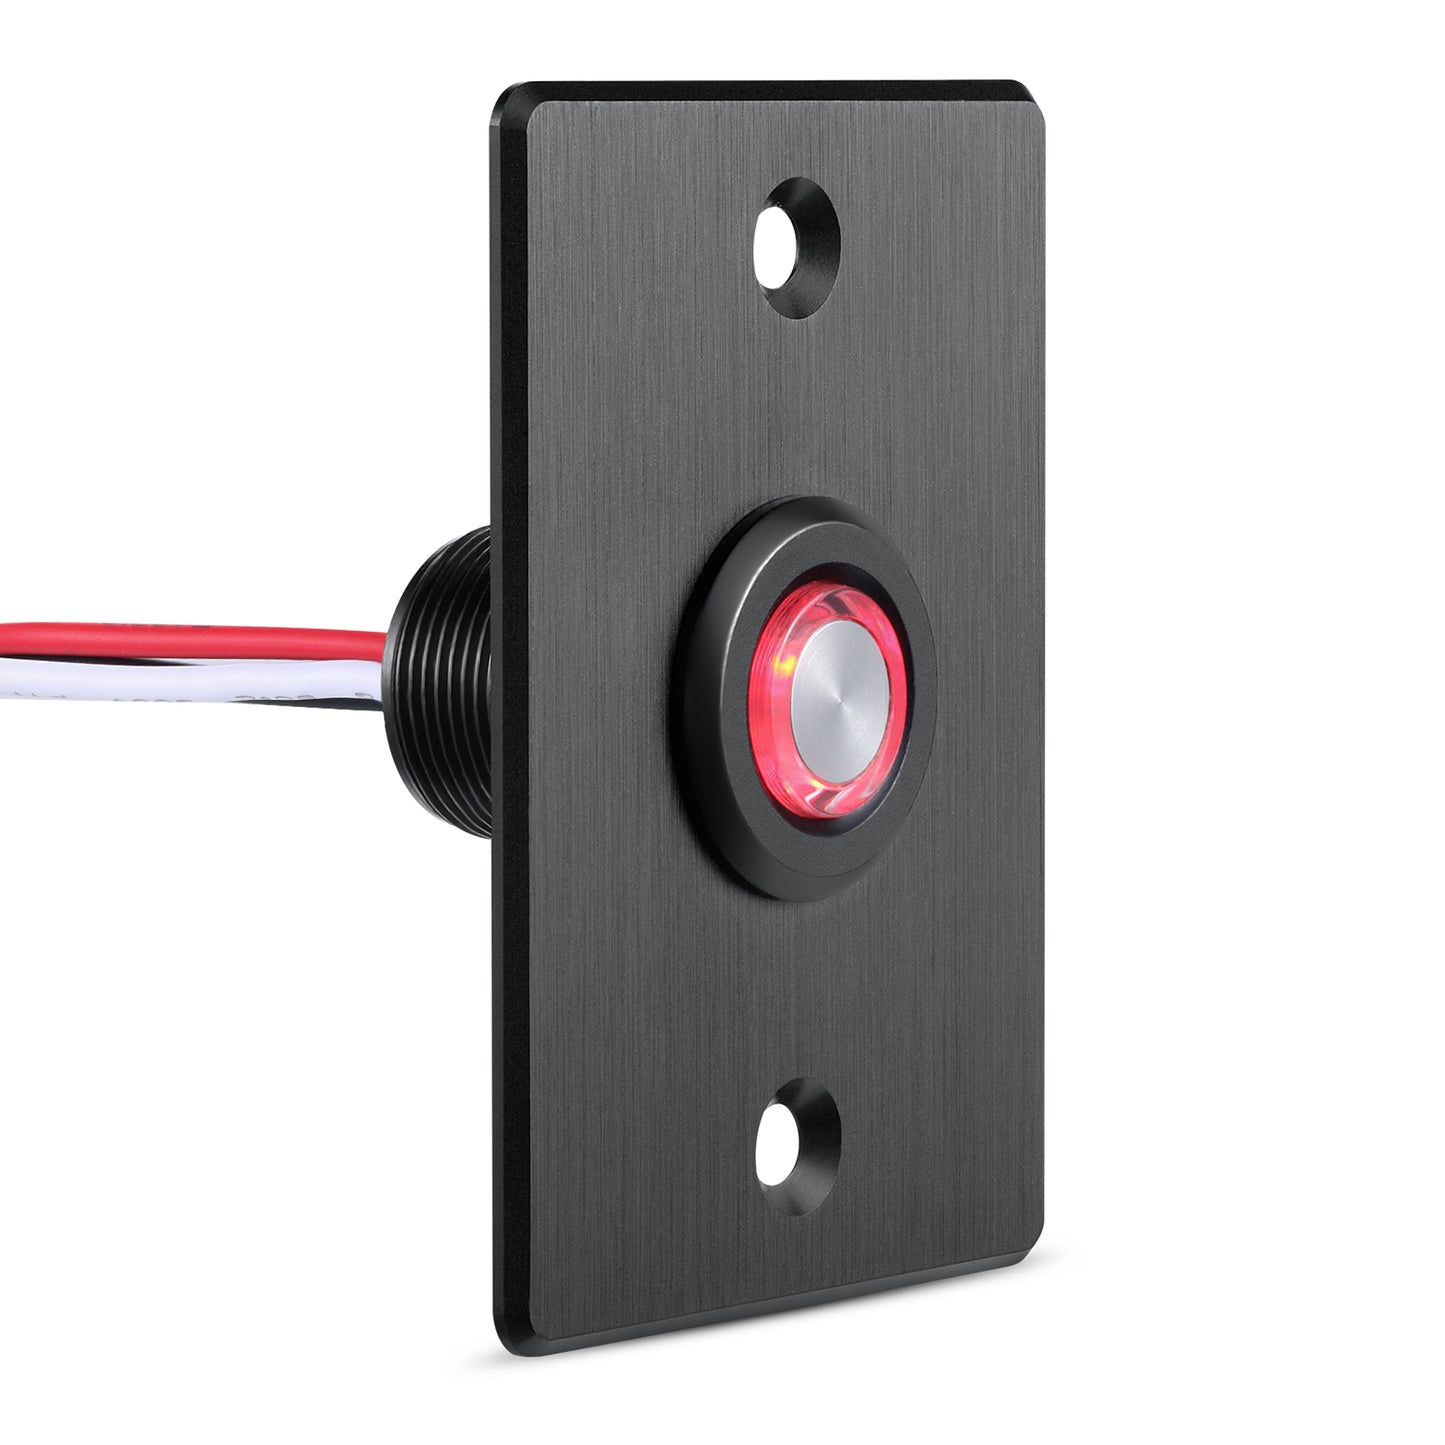 12V PWM Dimmer Switch Low Side, Push Button Dimmer for RV Boat Lighting & Led Strip Light, 6A Full Aluminum with Red Ring Light